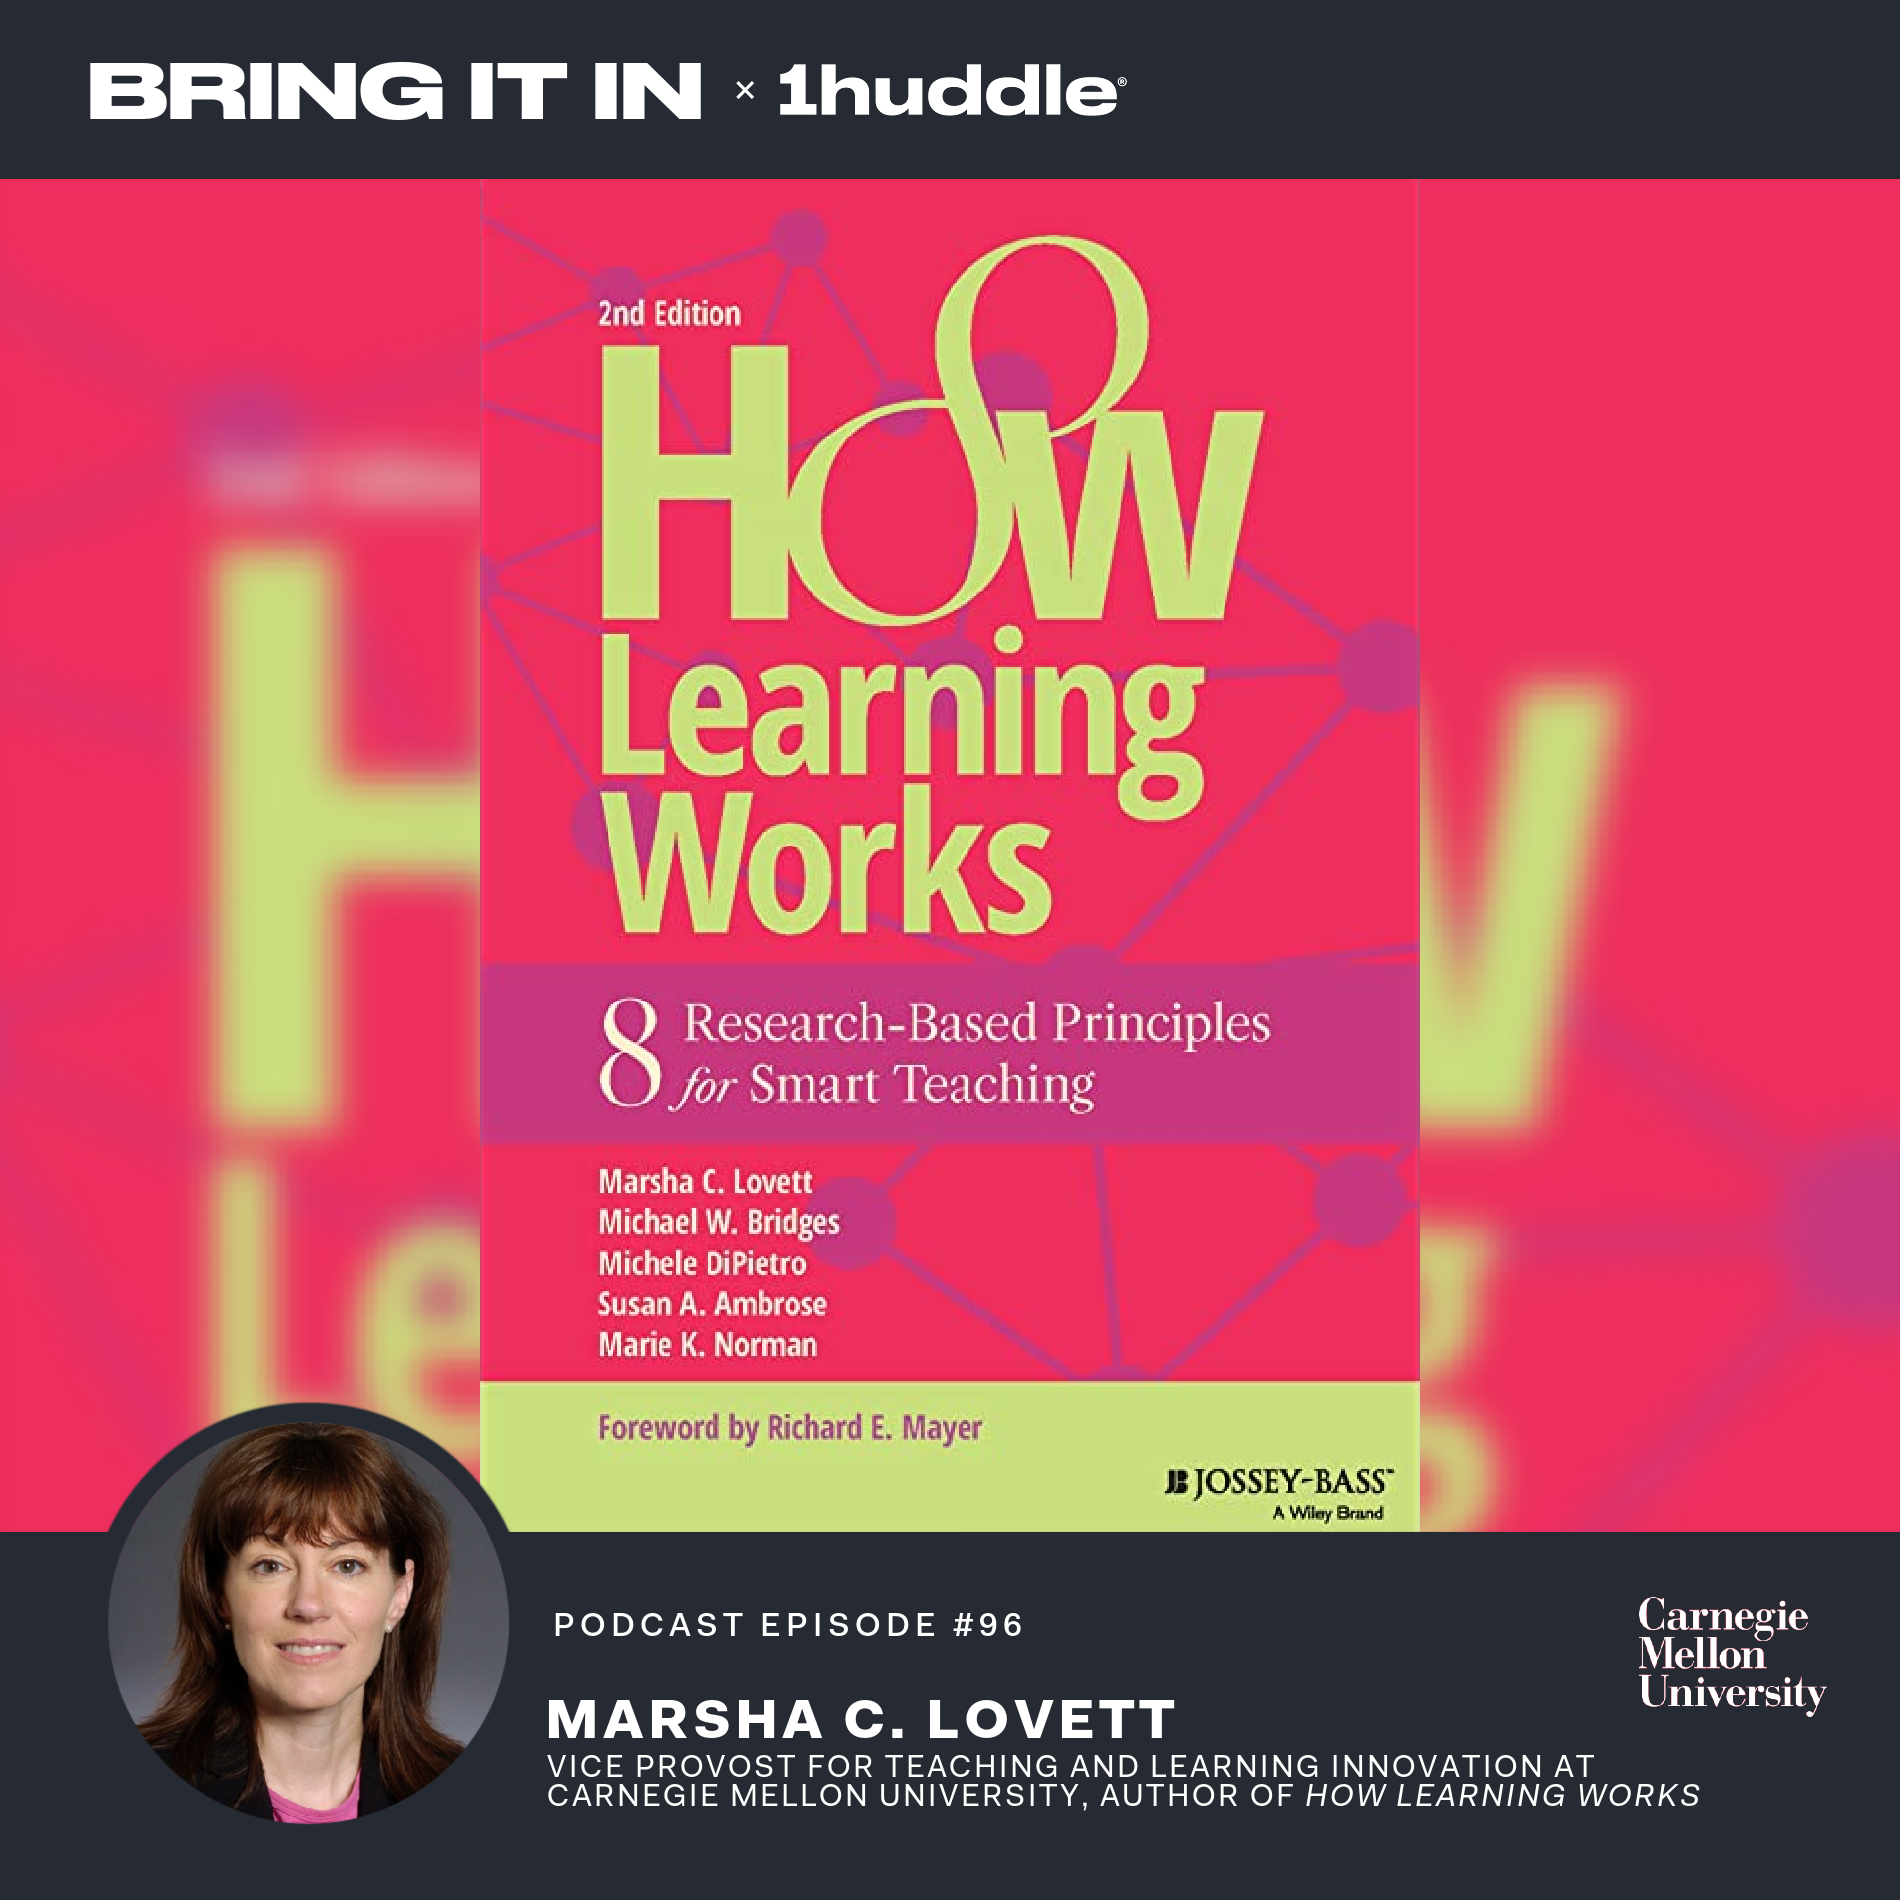 Marsha Lovett, PhD — Co-Author of “How Learning Works: 8 Research Based Principles of Smart Teaching,” Vice Provost for Teaching and Learning Innovation at the Carnegie Mellon University